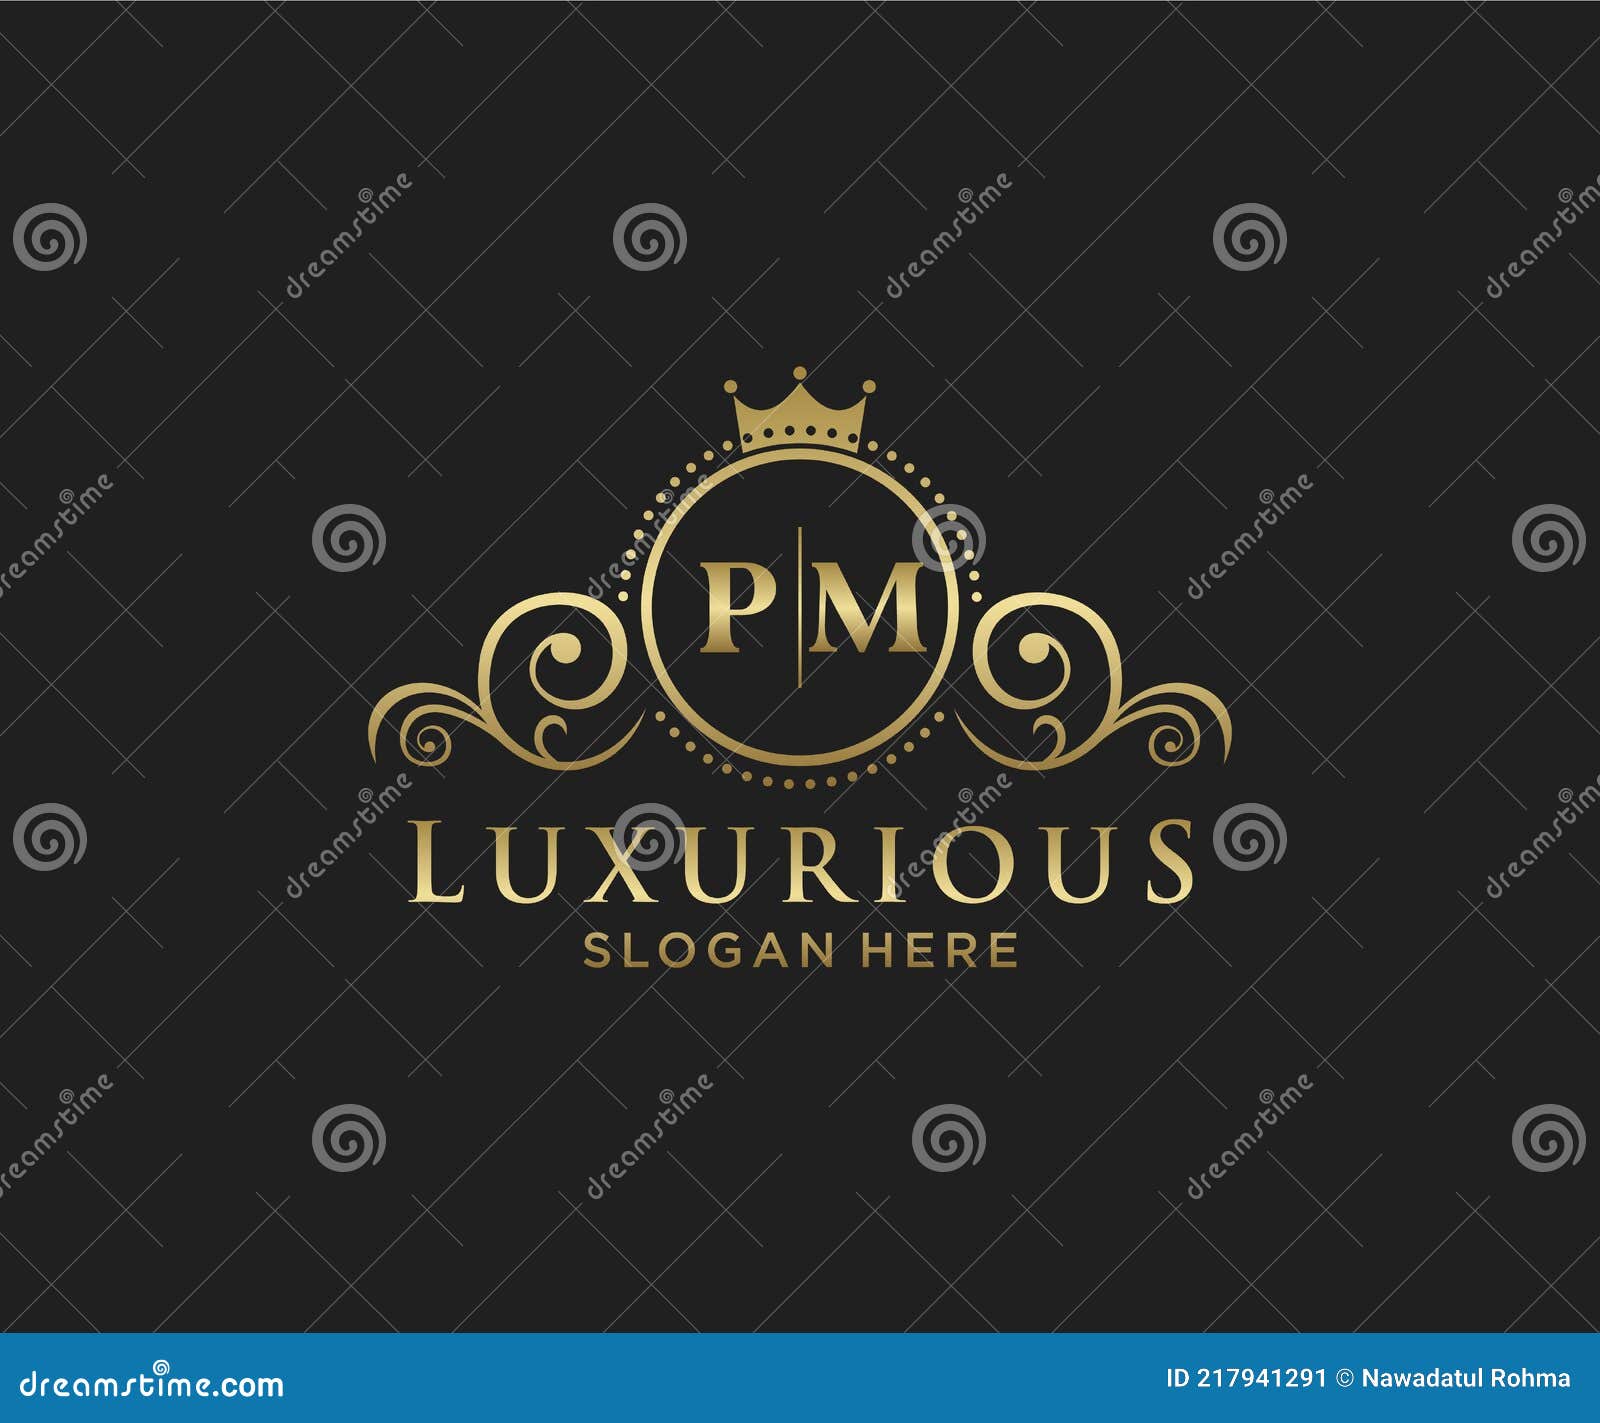 Pm letter initial with lion royal logo template Vector Image